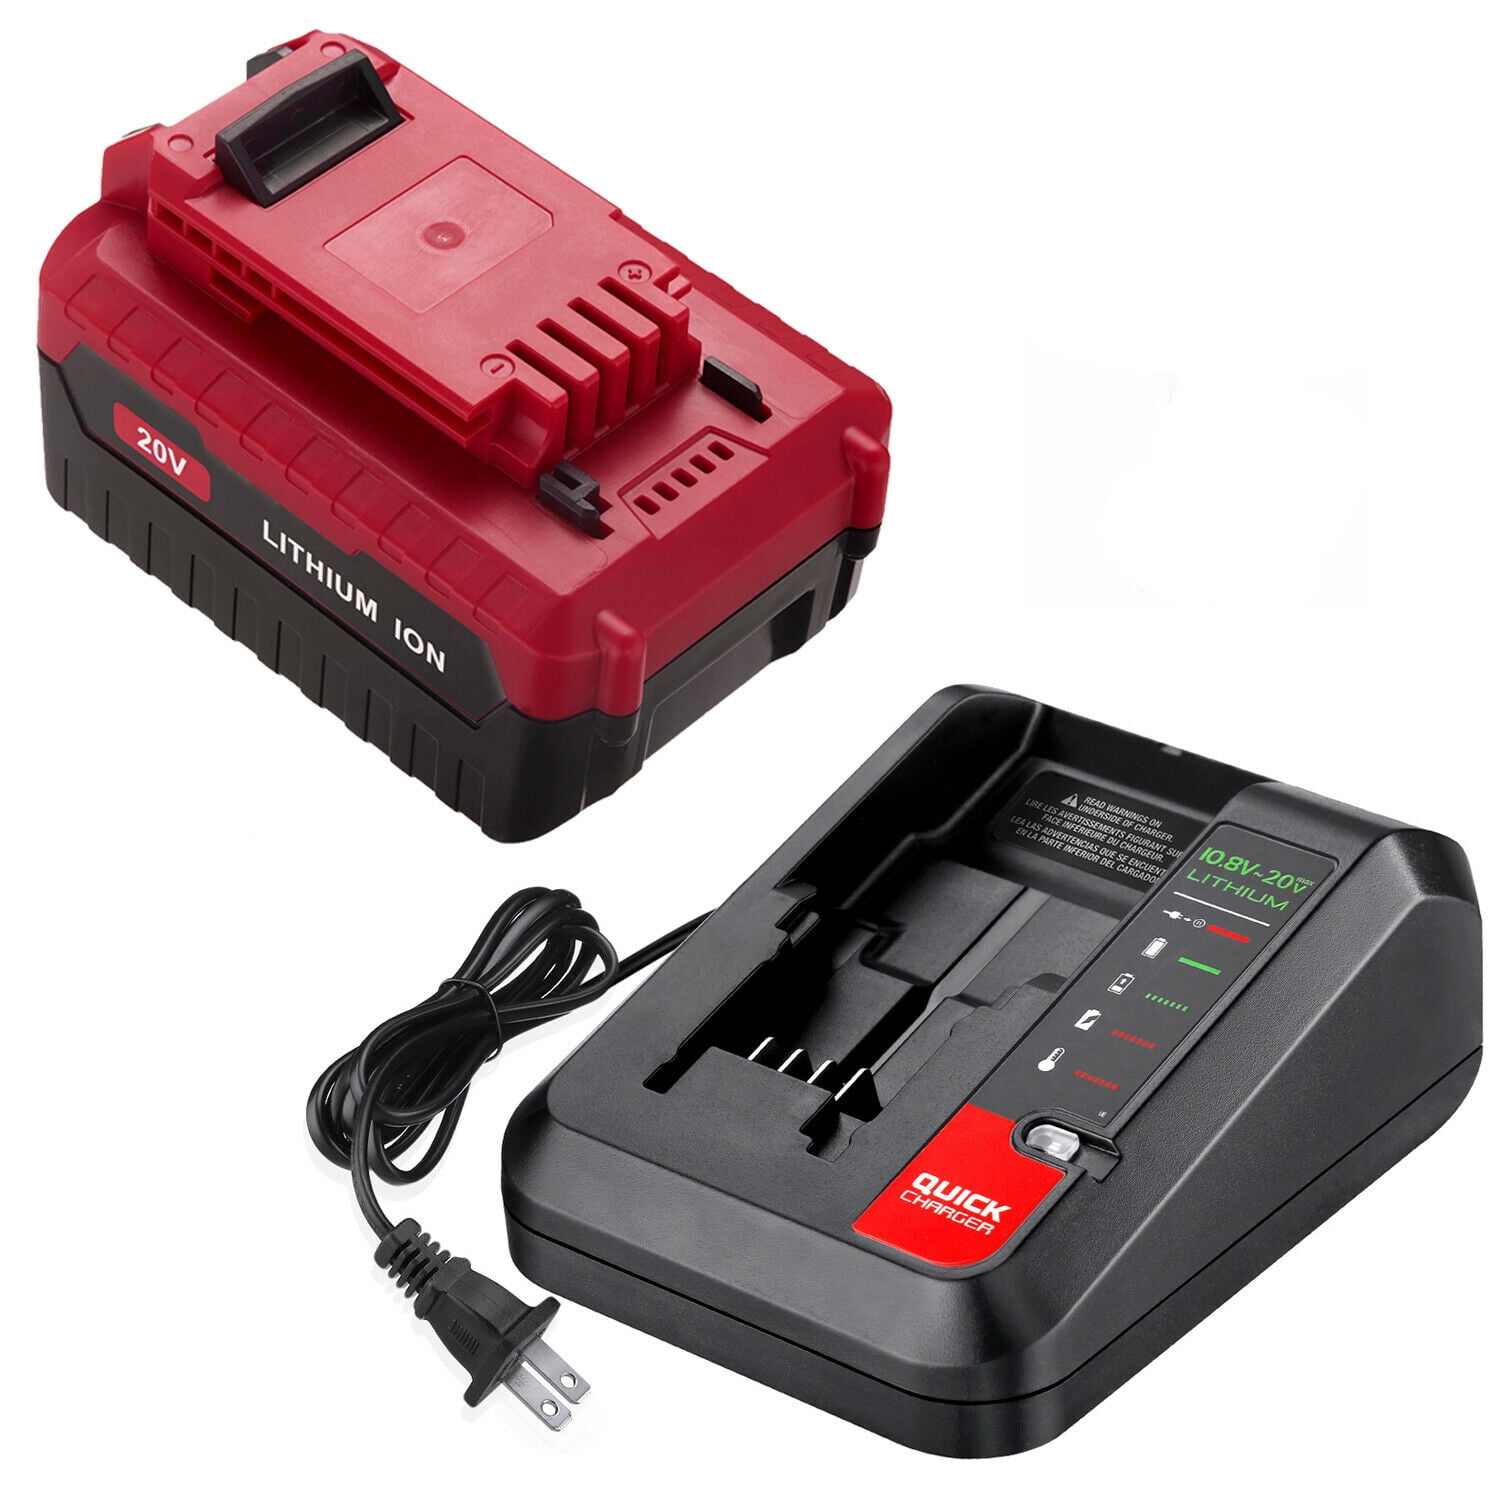 Tueddur 20V Upgraded Battery Charger PCC692L Replacement for Porter Cable and Black&Decker 20V Max Lithium-ion charger PCC691 BDCAC202B LCS1620B,Compatible with Battery PCC680L PCC681L PCC682L PCC685L